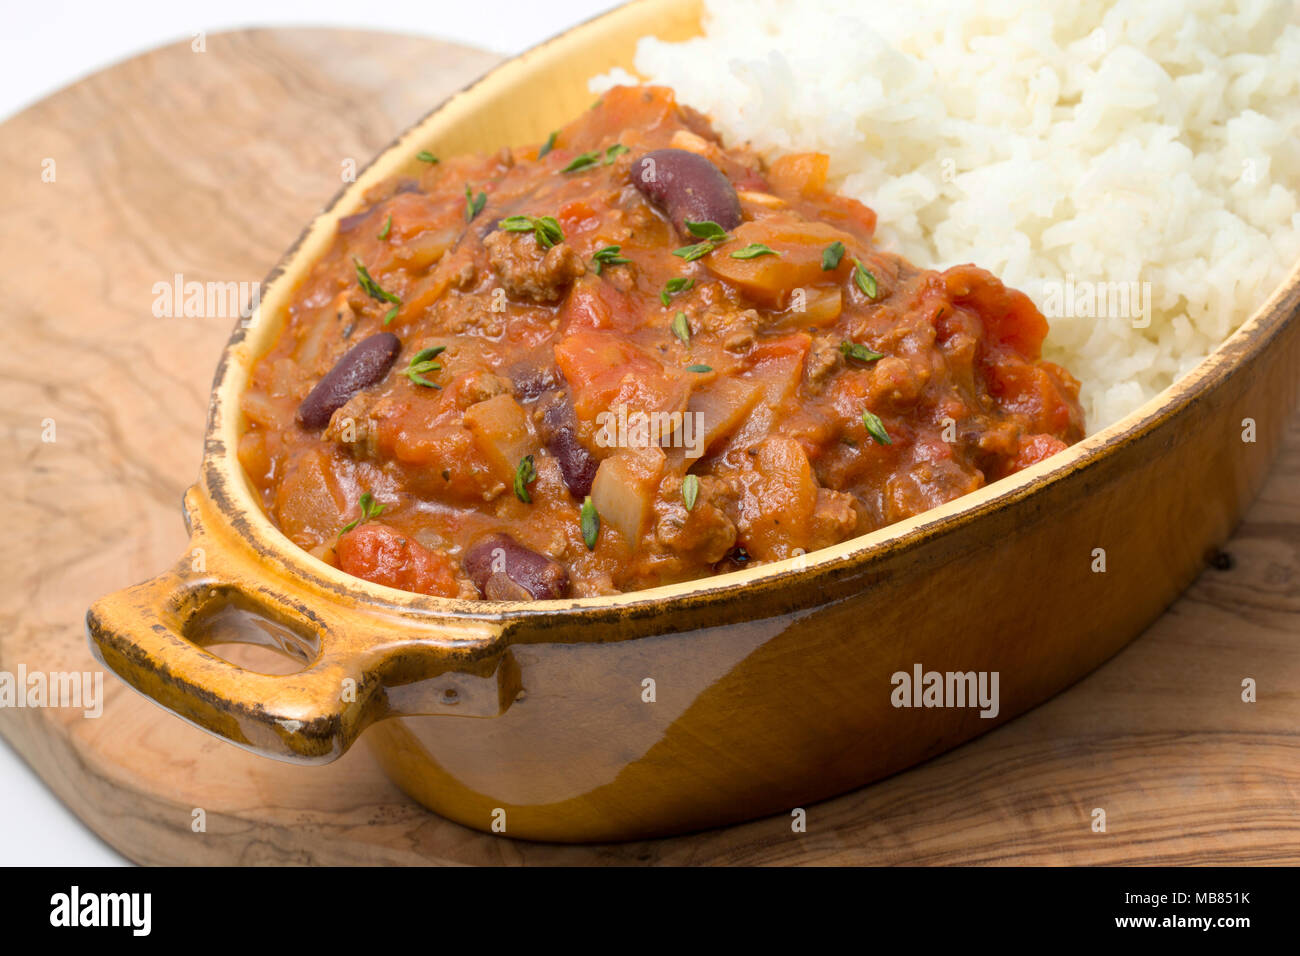 Chili con carne made from minced venison from a roe deer, Capreolus capreolus, kidney beans, tomatoes, onions, spices and sprinkled with fresh thyme.  Stock Photo